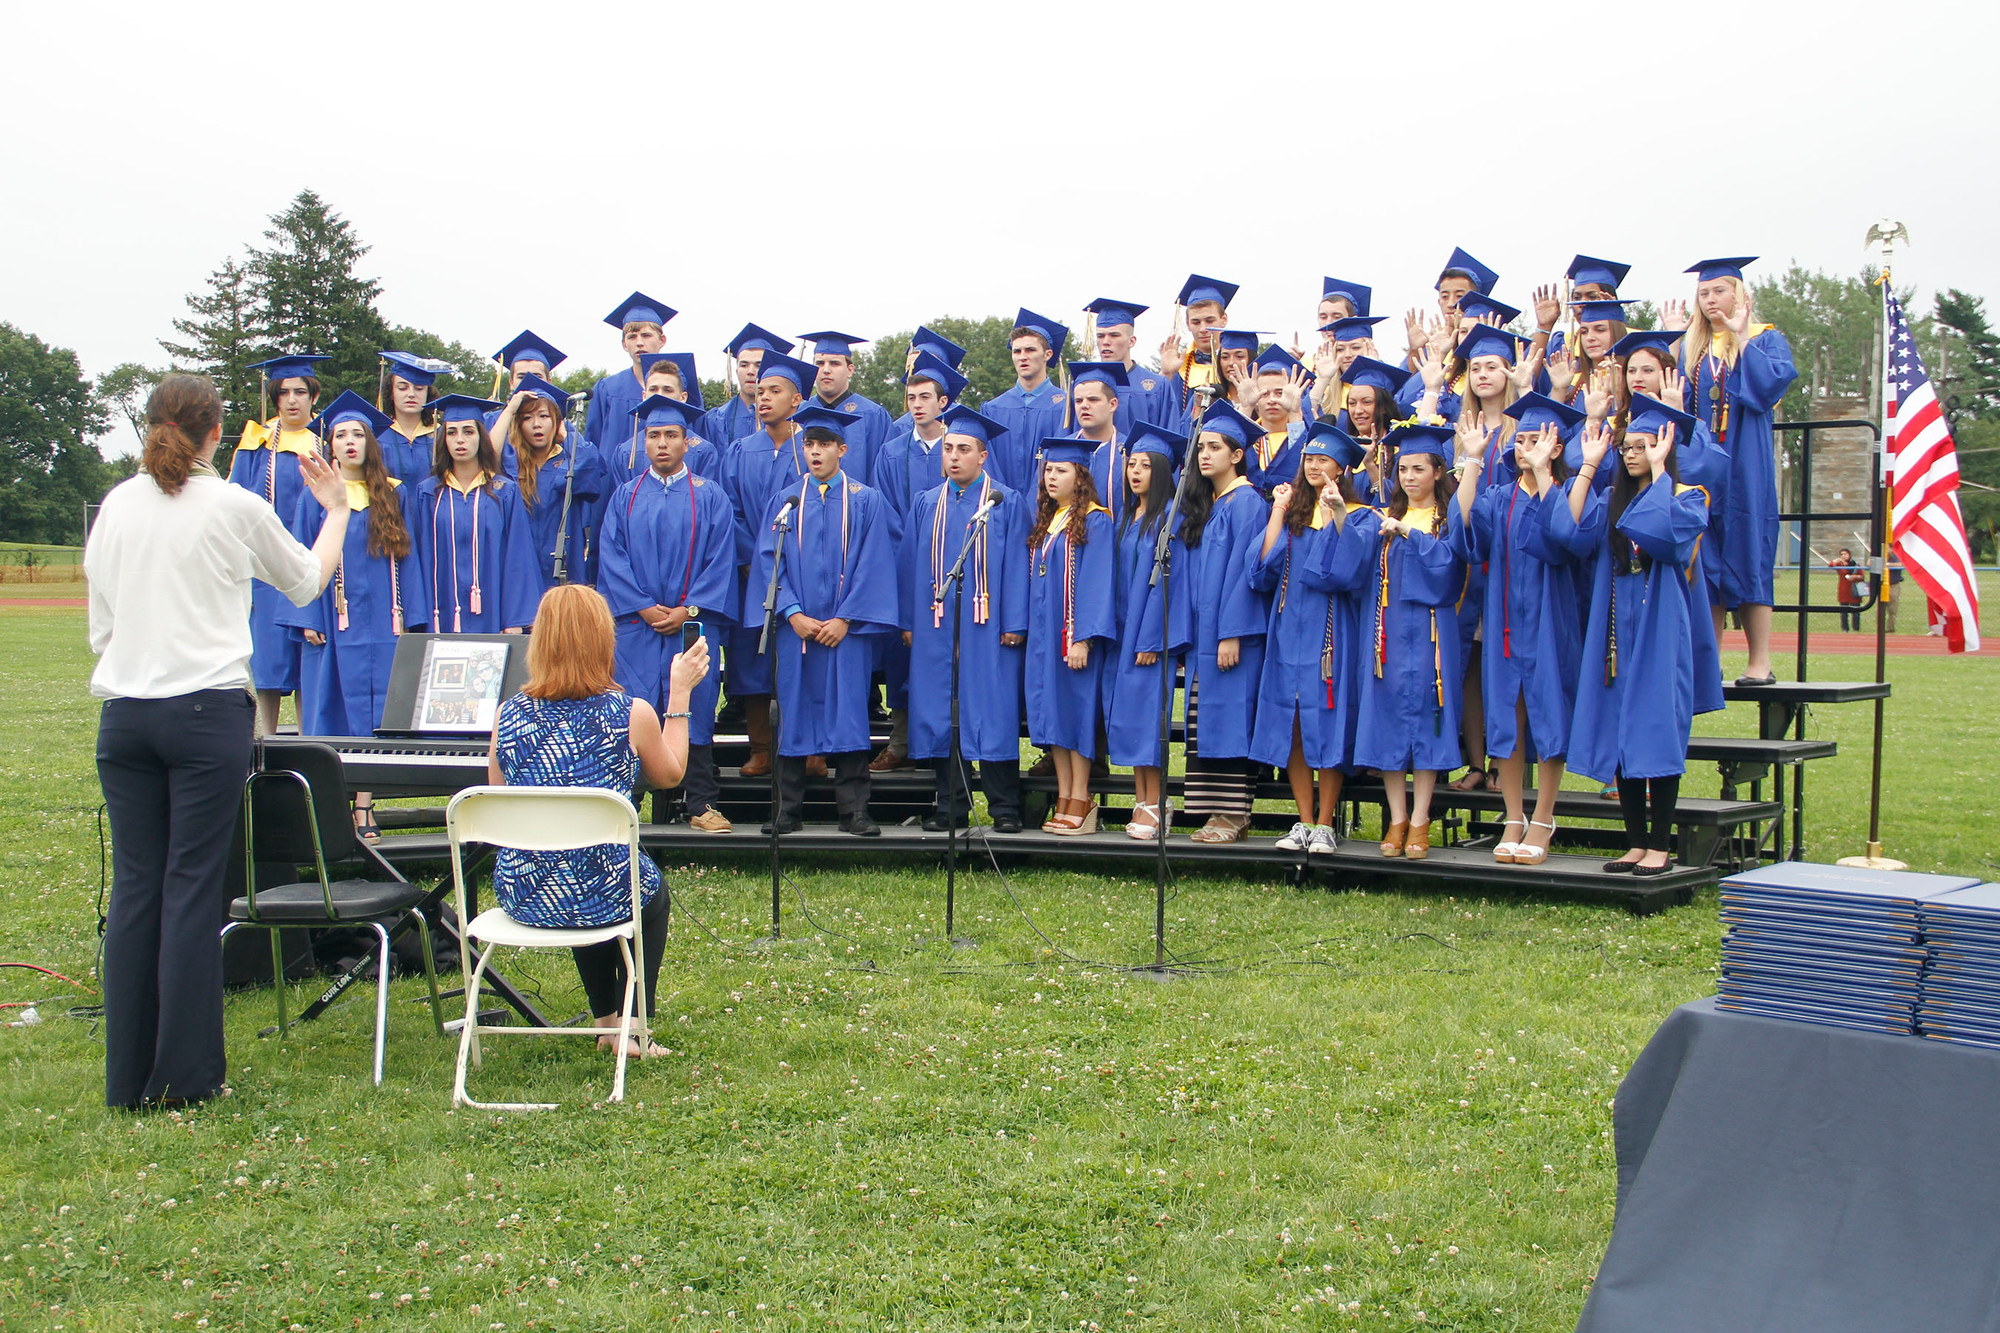 The Senior Chorale and American Sign Language students performed the Star Spangled Banner.